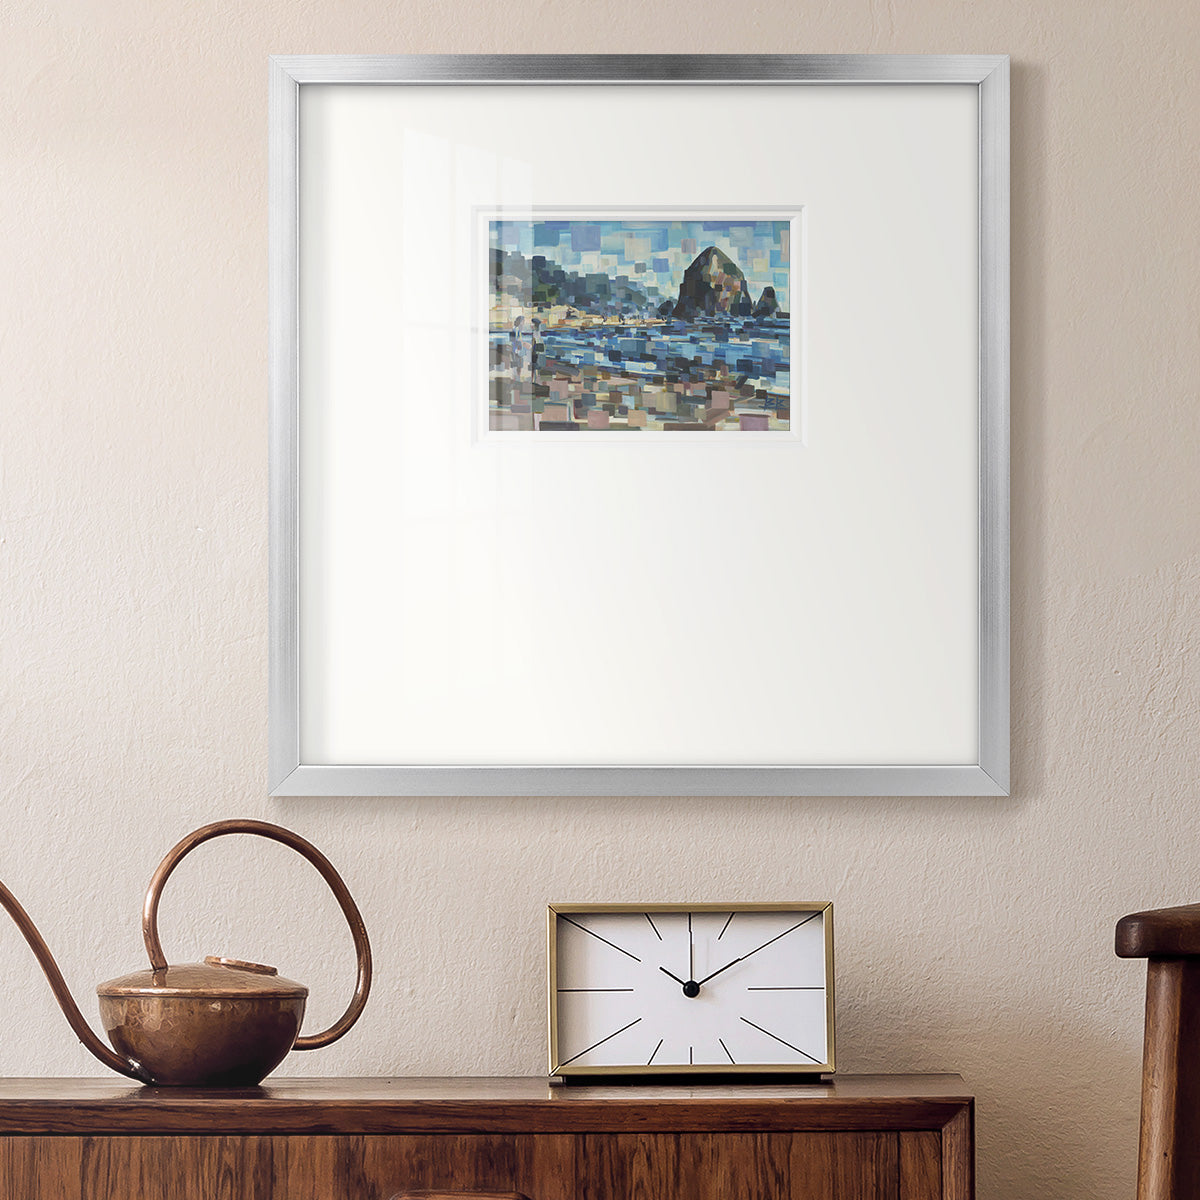 Evening in Cannon Beach- Premium Framed Print Double Matboard